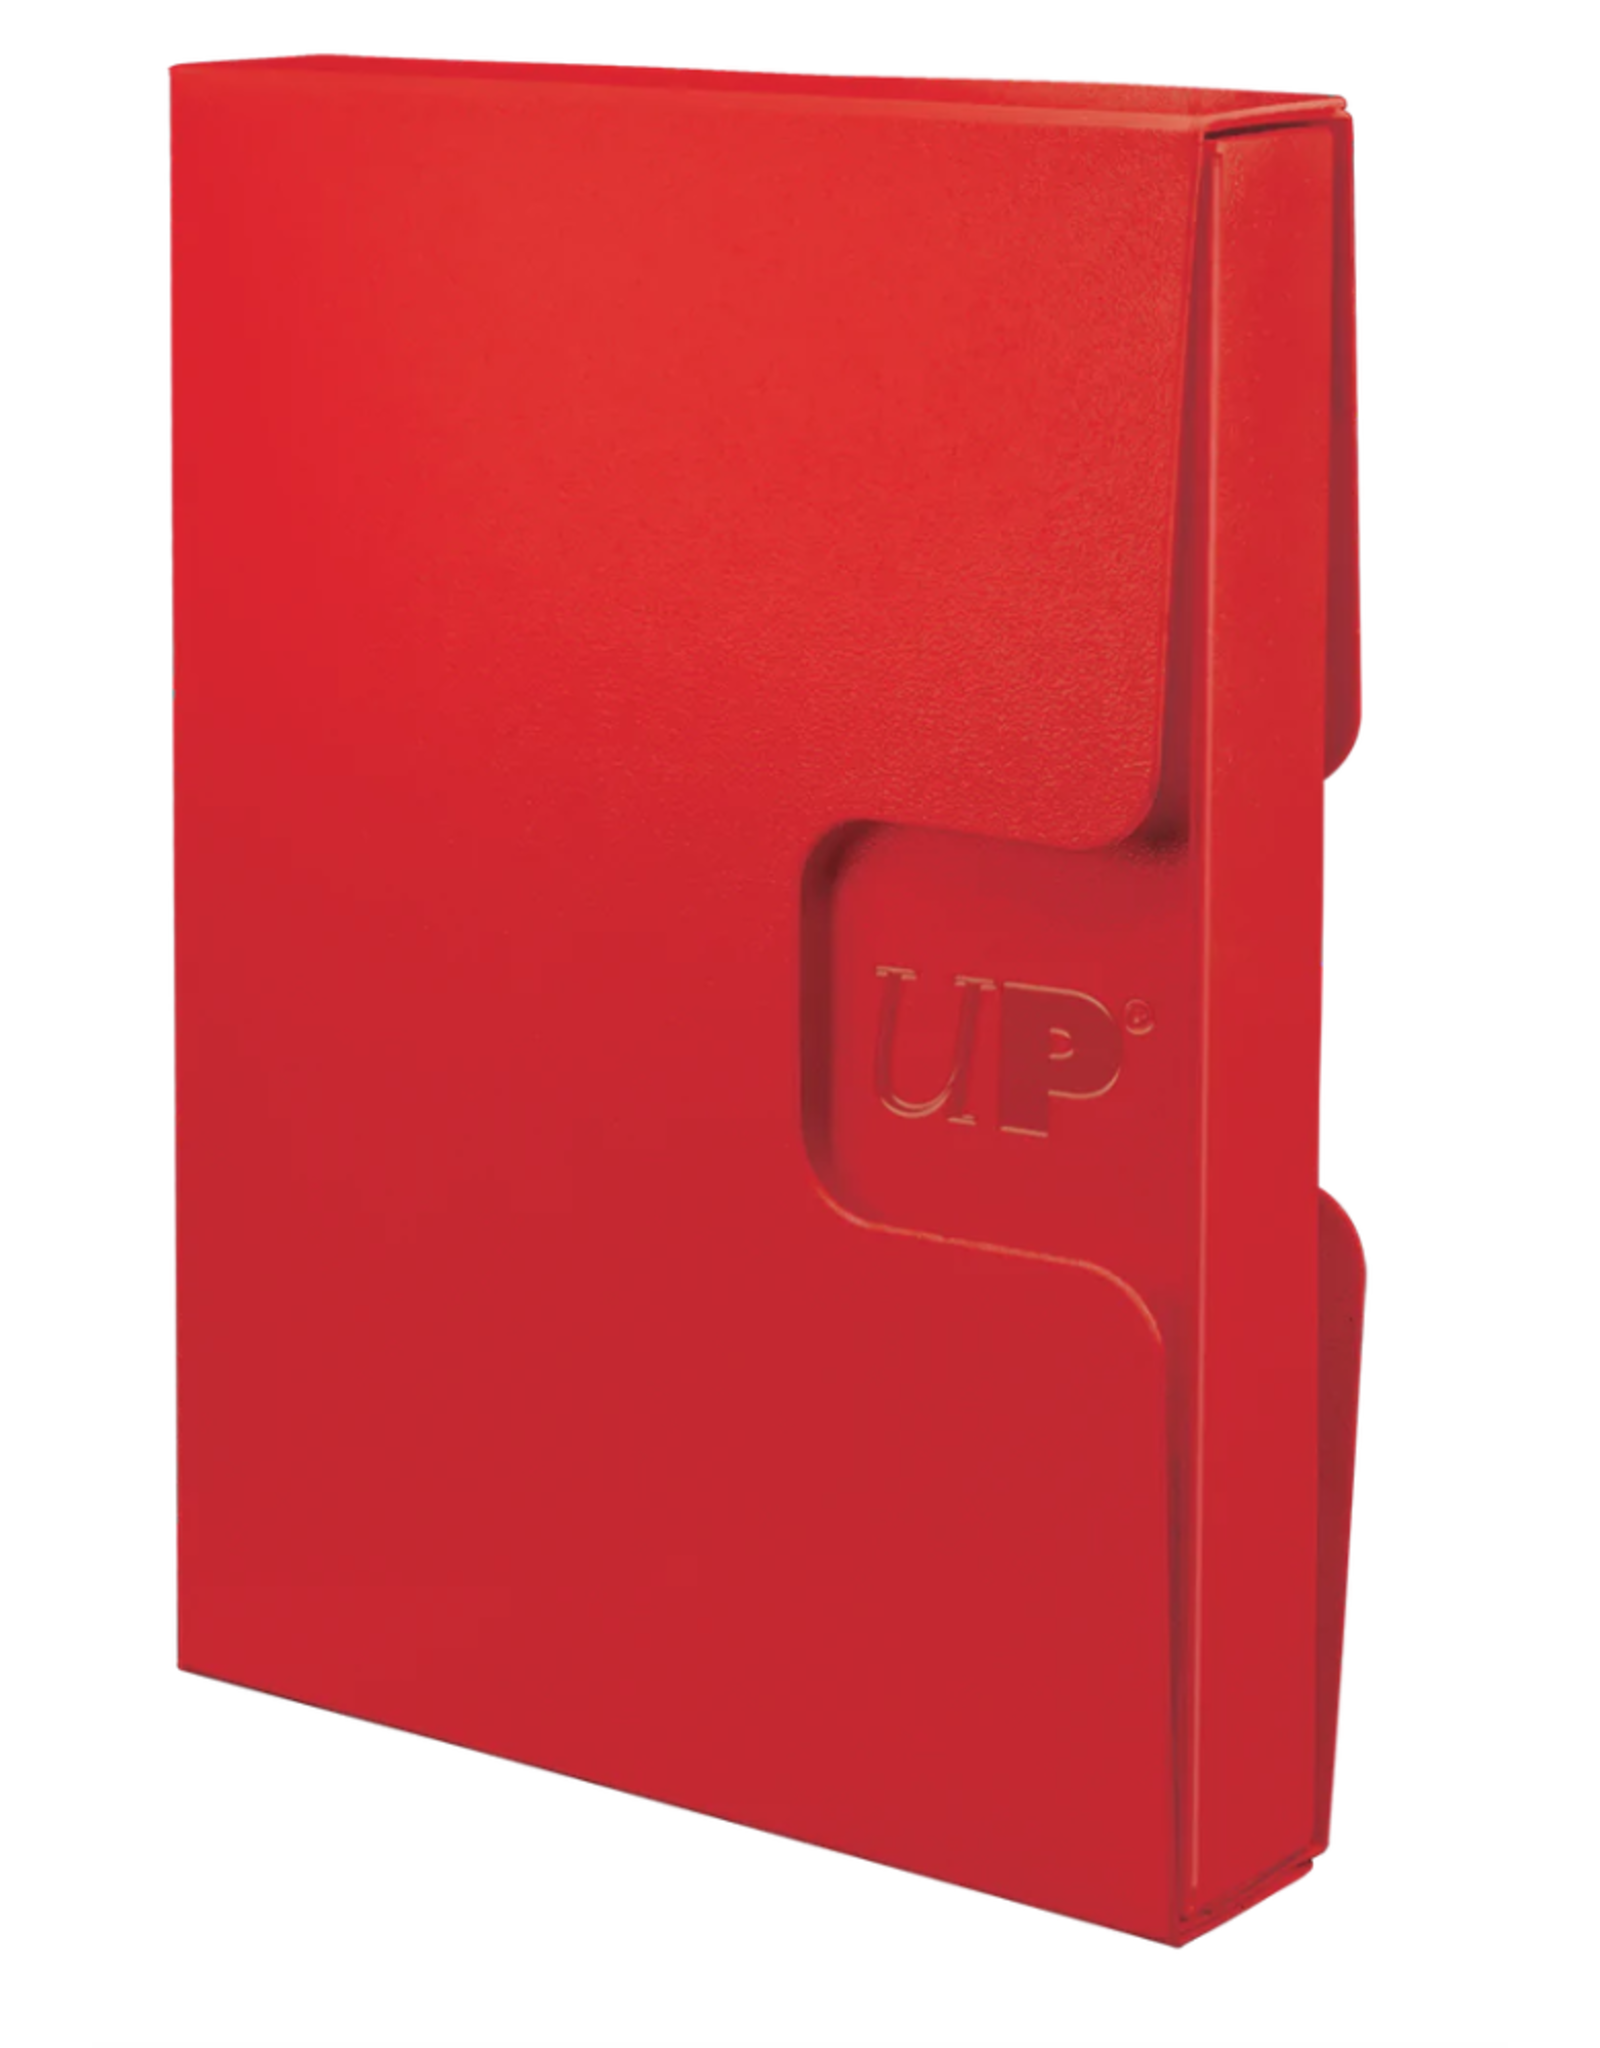 Ultra Pro PRO 15+ Card Box 3-pack: Red